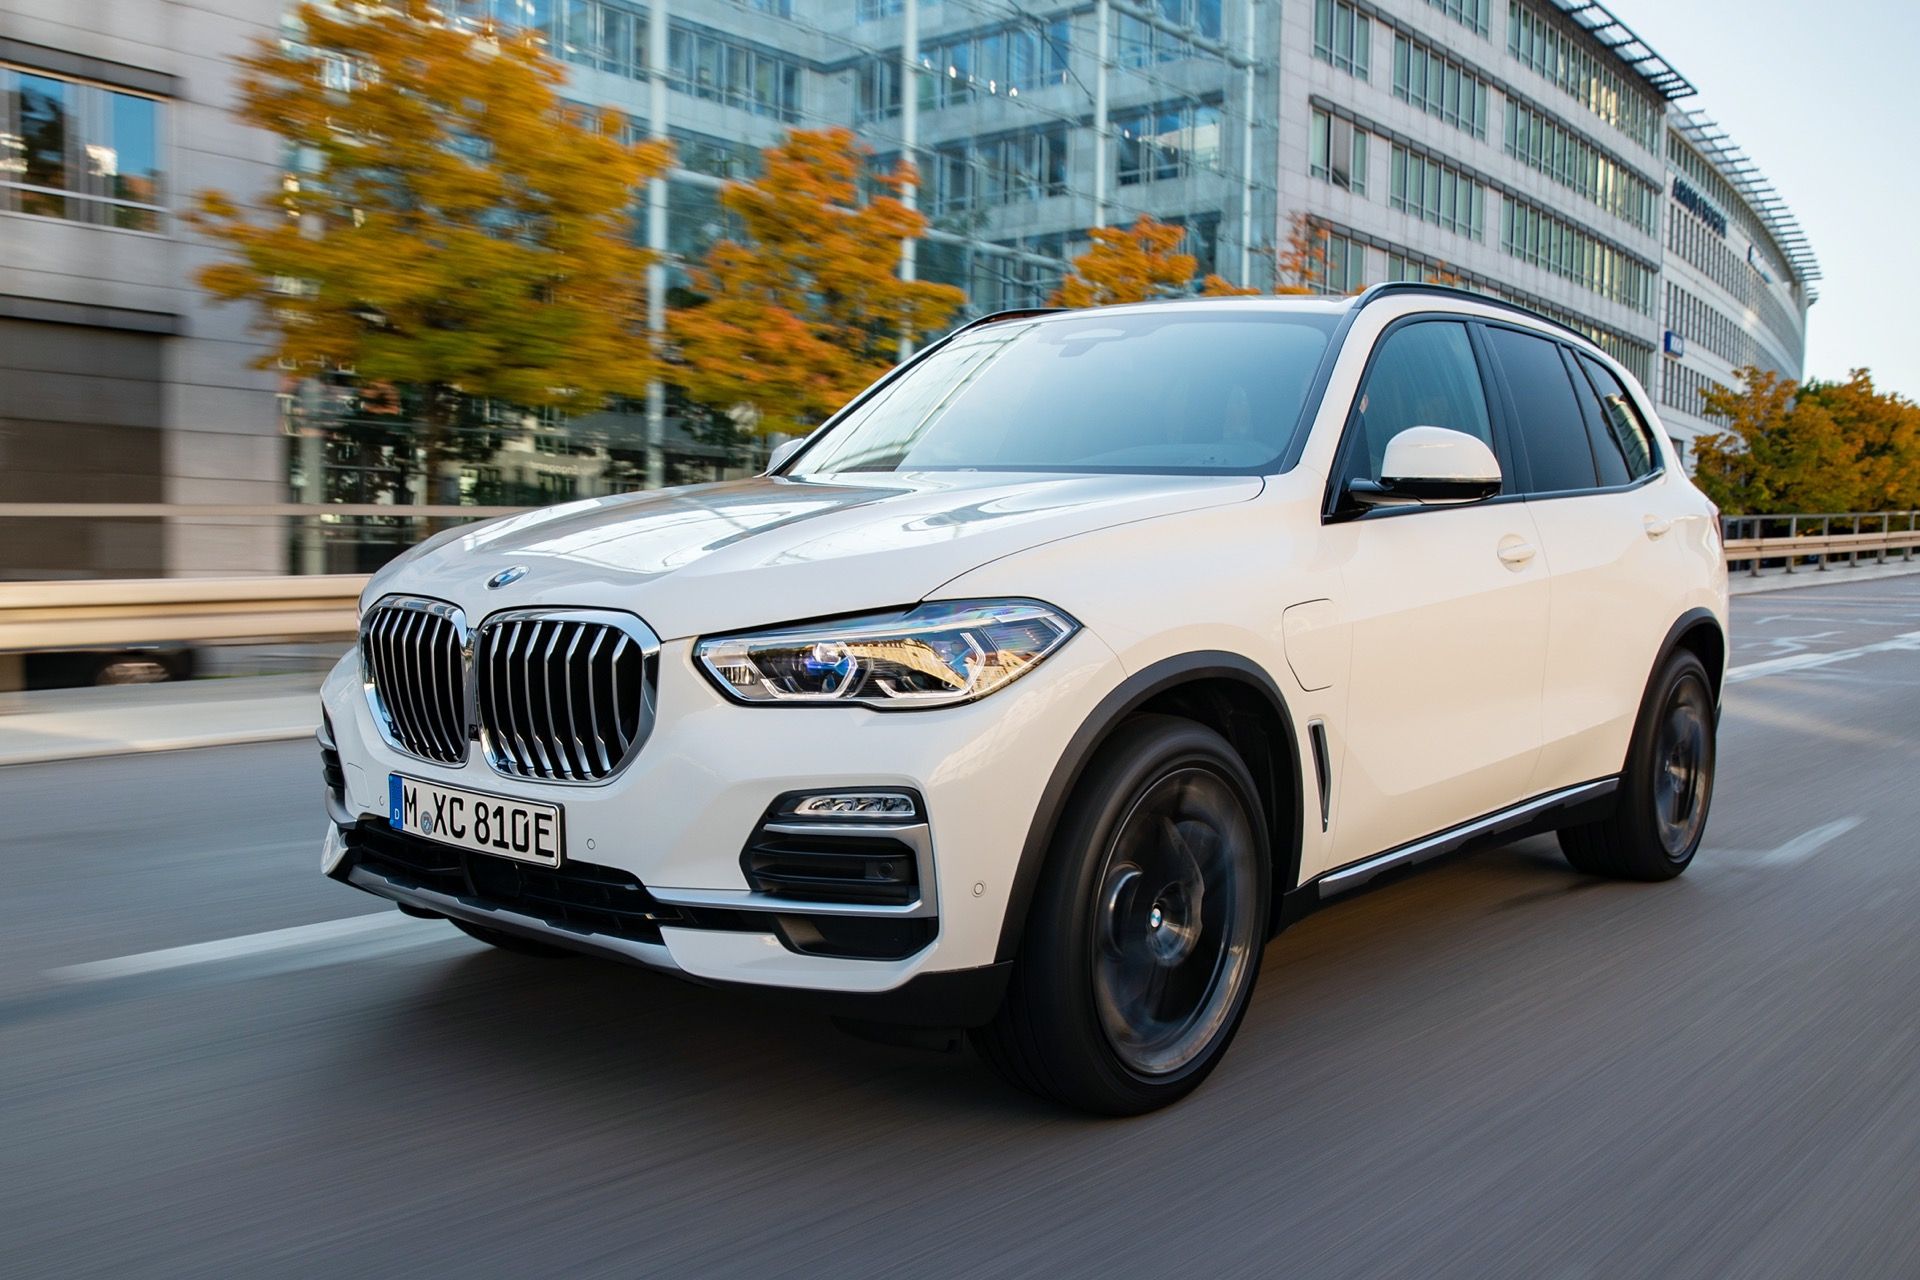 BMW X5 Plug In Hybrid SUV: More Power, More Than Double The Electric Range